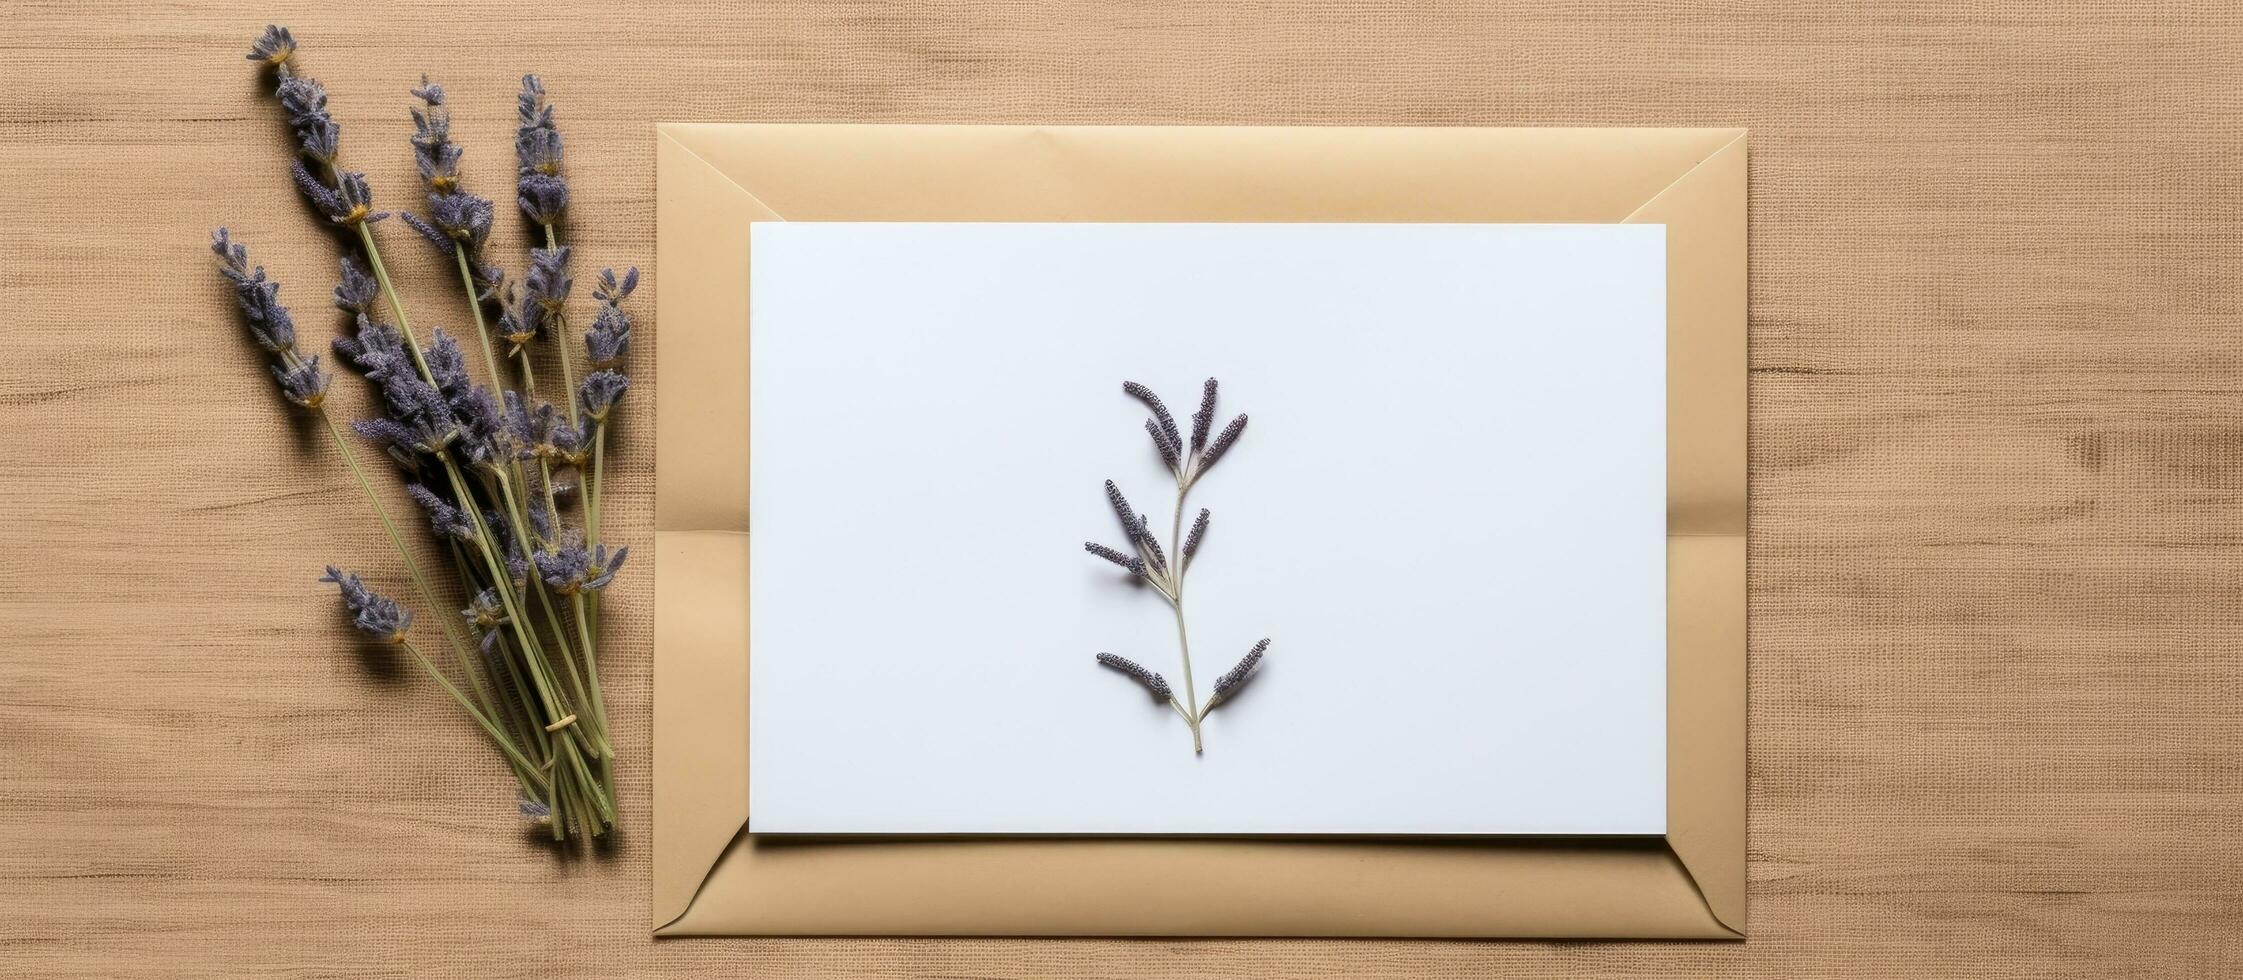 Top view of a greeting or invitation card mockup with an envelope, lavender, and dried eucalyptus photo